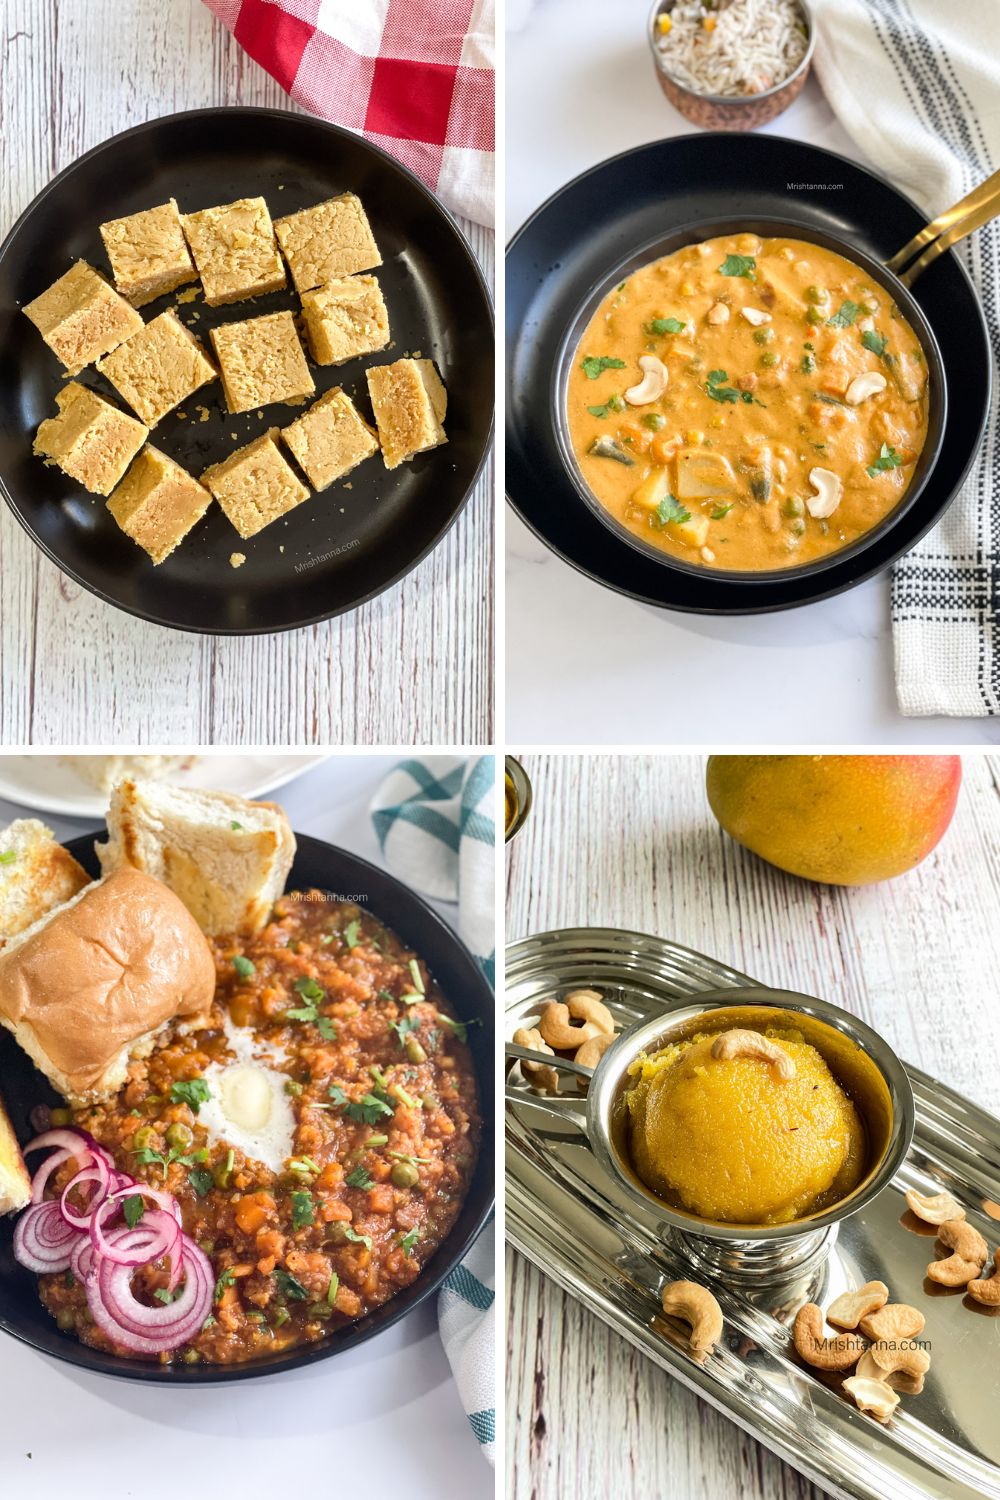 vegan Diwali recipes including, snacks, sweets and main dishes.